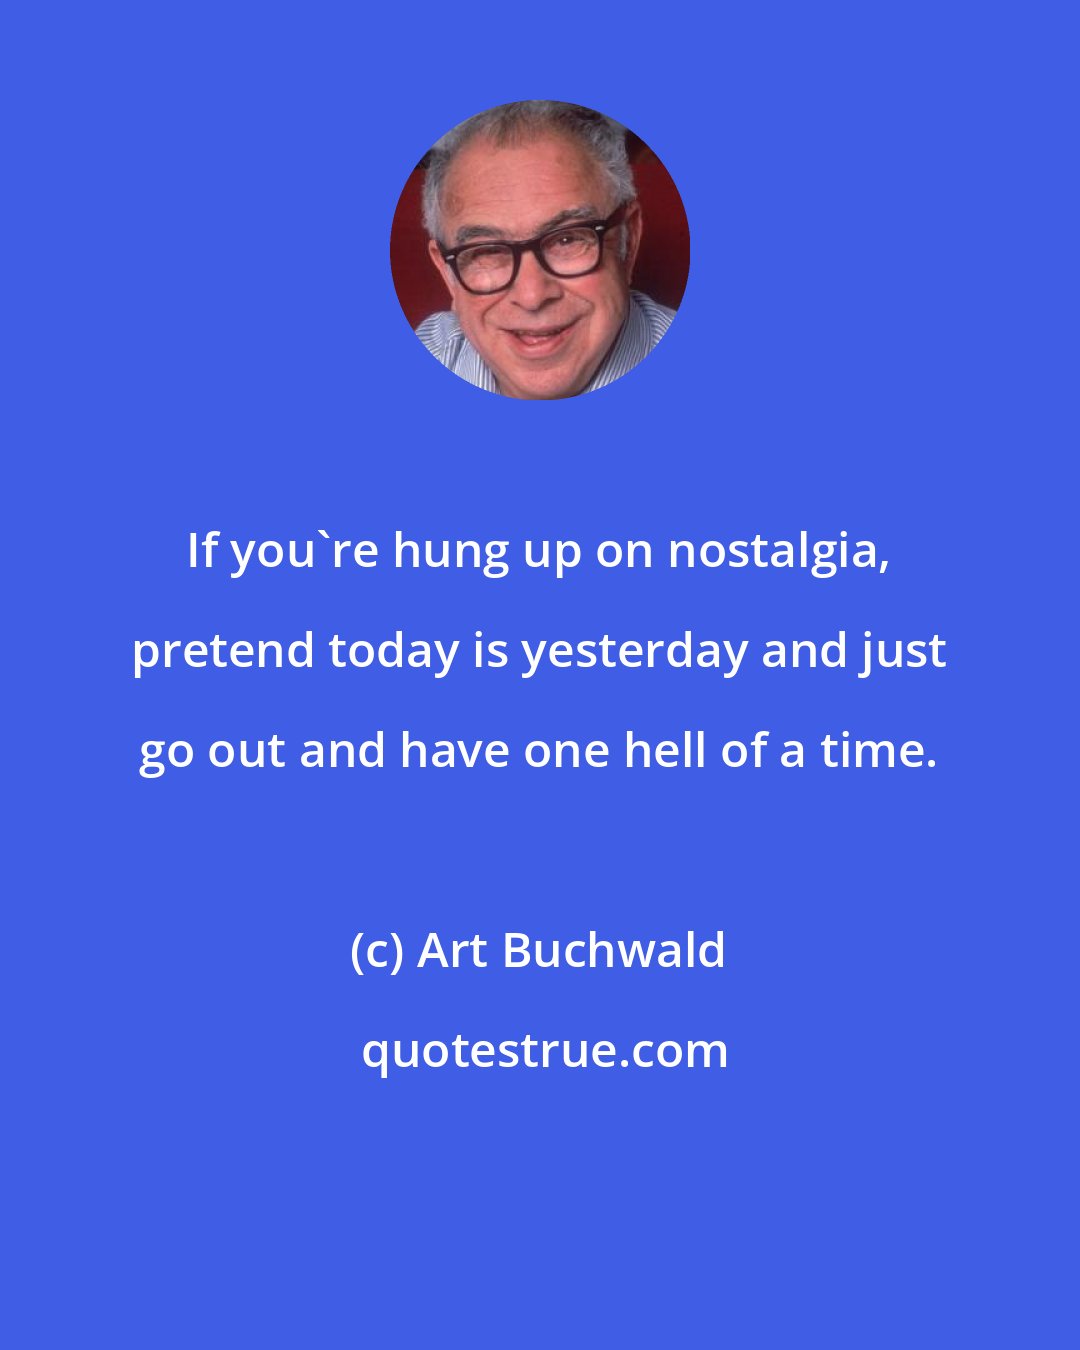 Art Buchwald: If you're hung up on nostalgia, pretend today is yesterday and just go out and have one hell of a time.